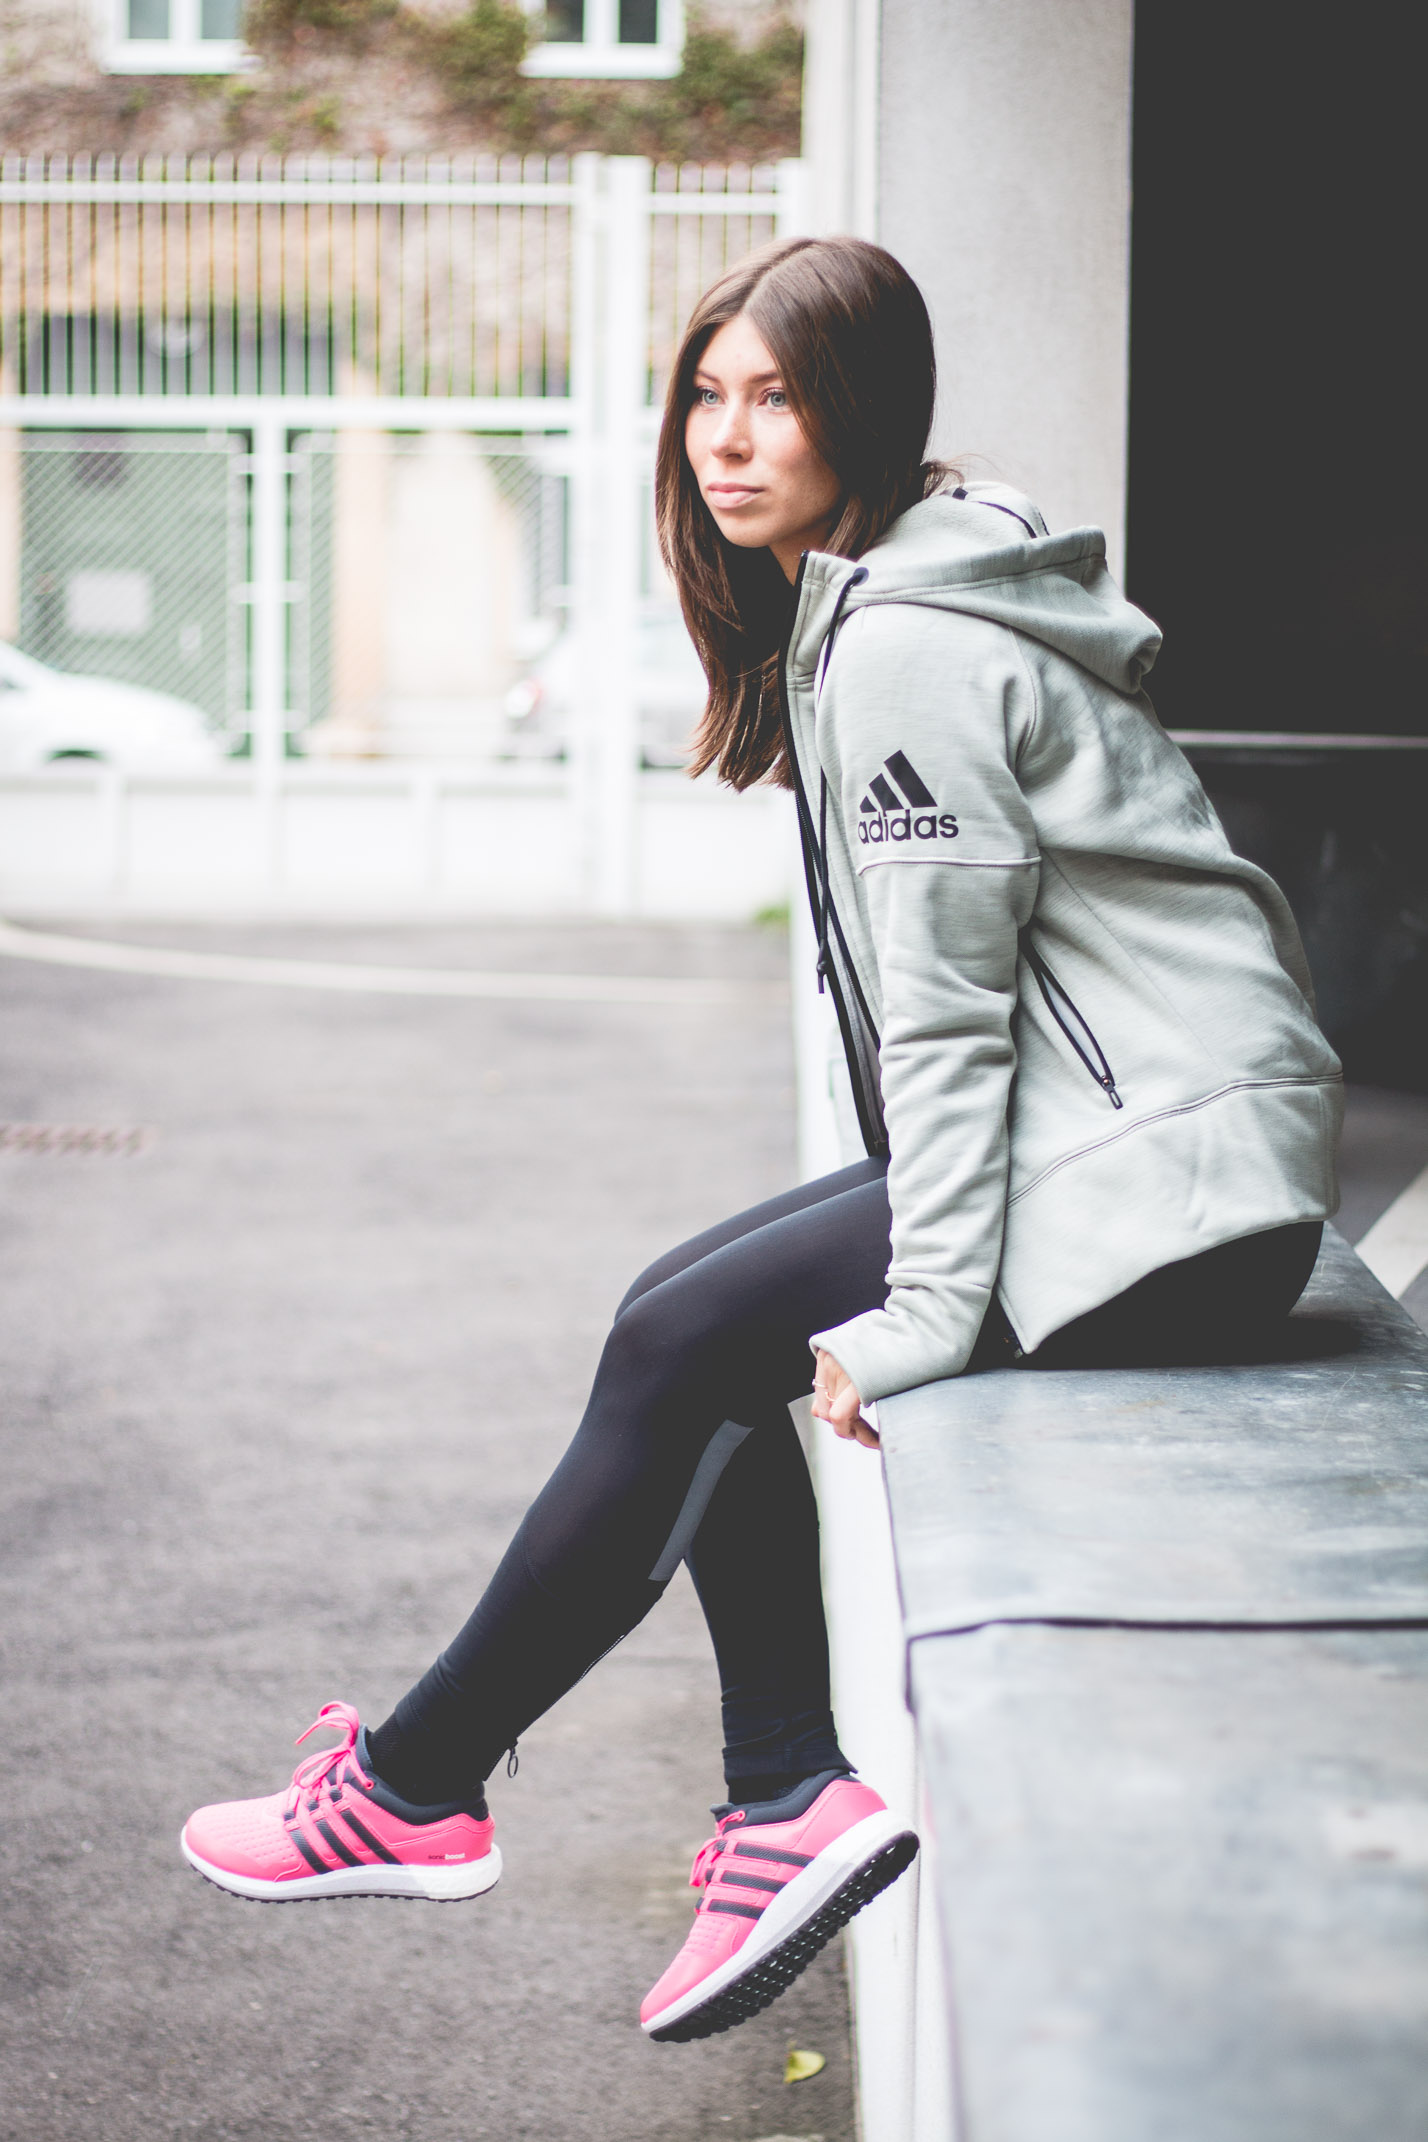 Adidas Climaheat - Running in Winter | Love Daily Dose